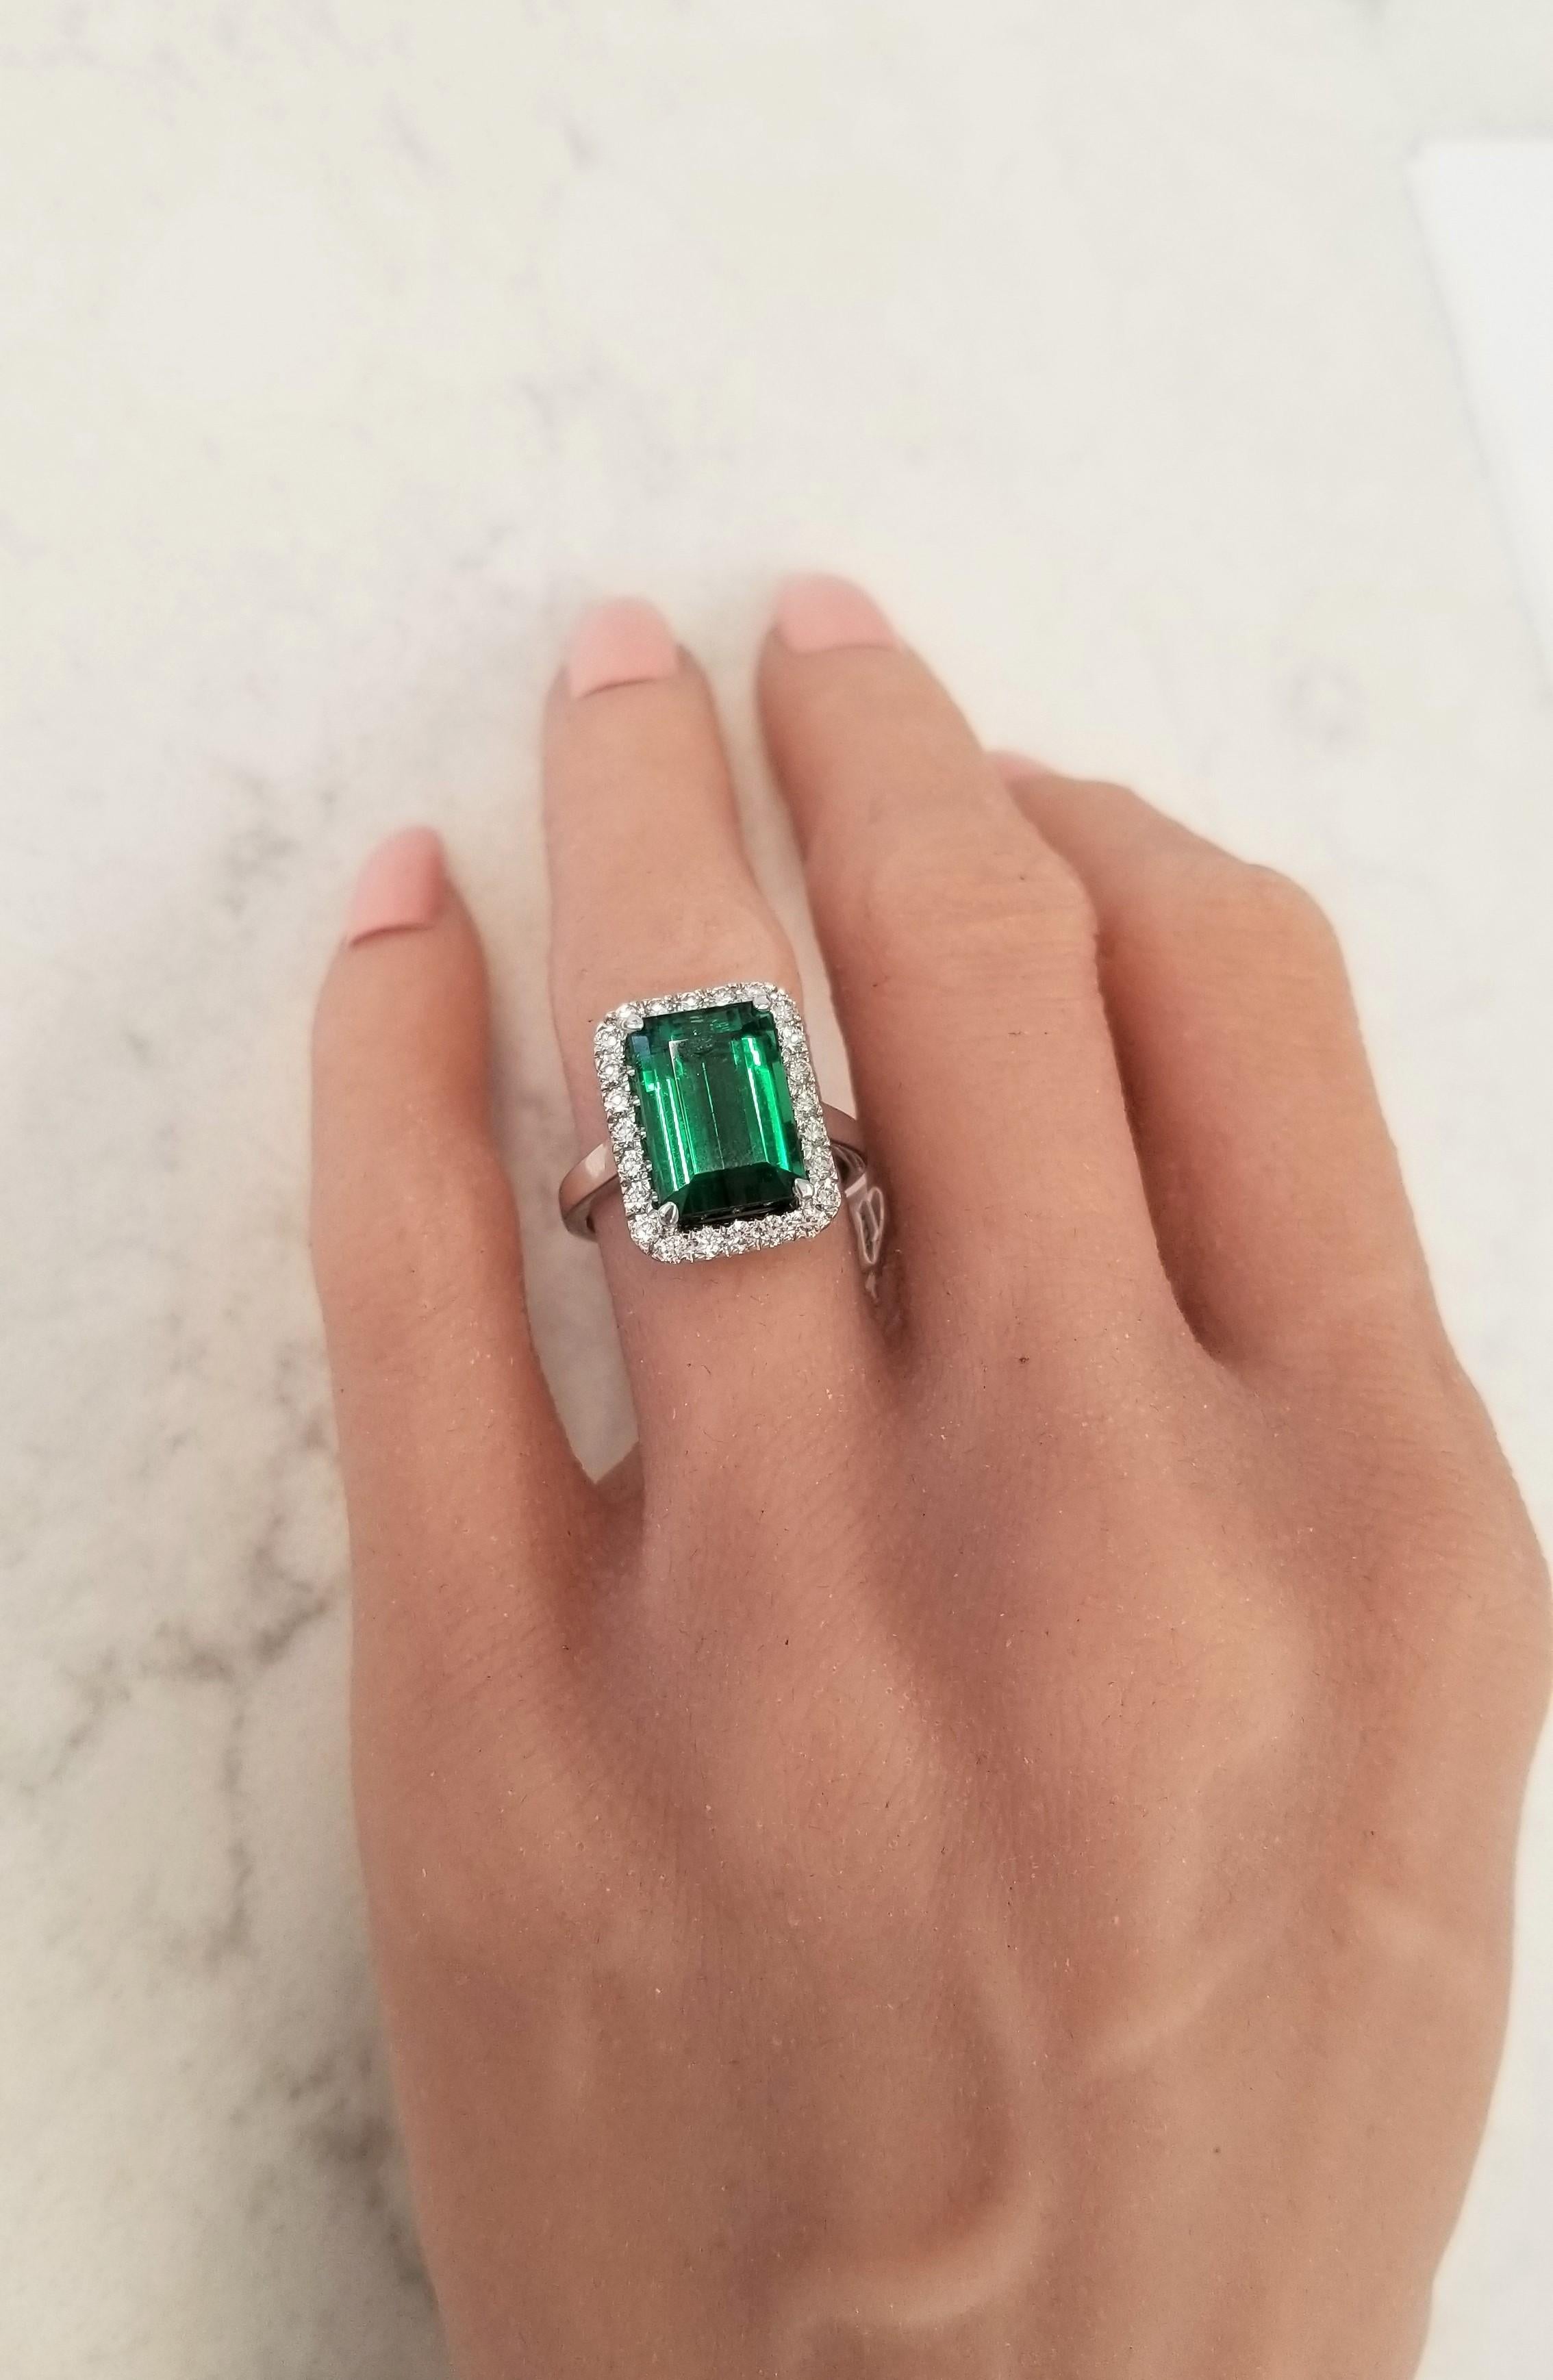 This is a 6.60 carat emerald-cut, lush grass green, tourmaline measuring 12.58 X 8.62mm. Its gem source is Brazil. This gem's main exhibit is its clean, crisp spring forest green hue. Its transparency and luster are superb. A total of 24